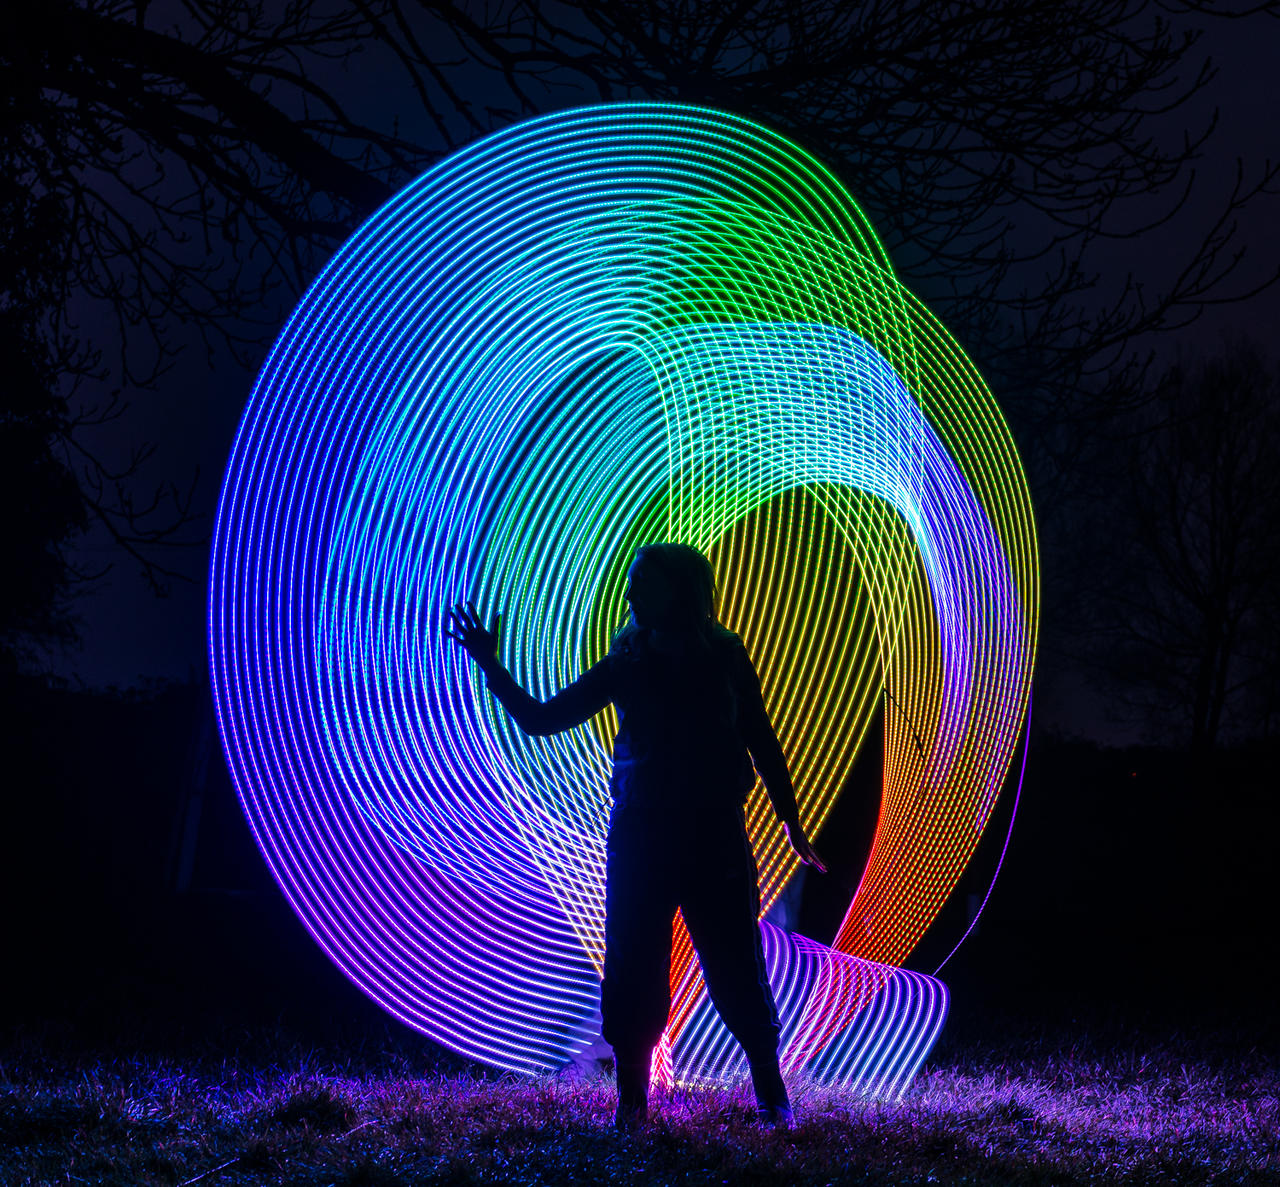 Light Painting 101: How Does it Work?